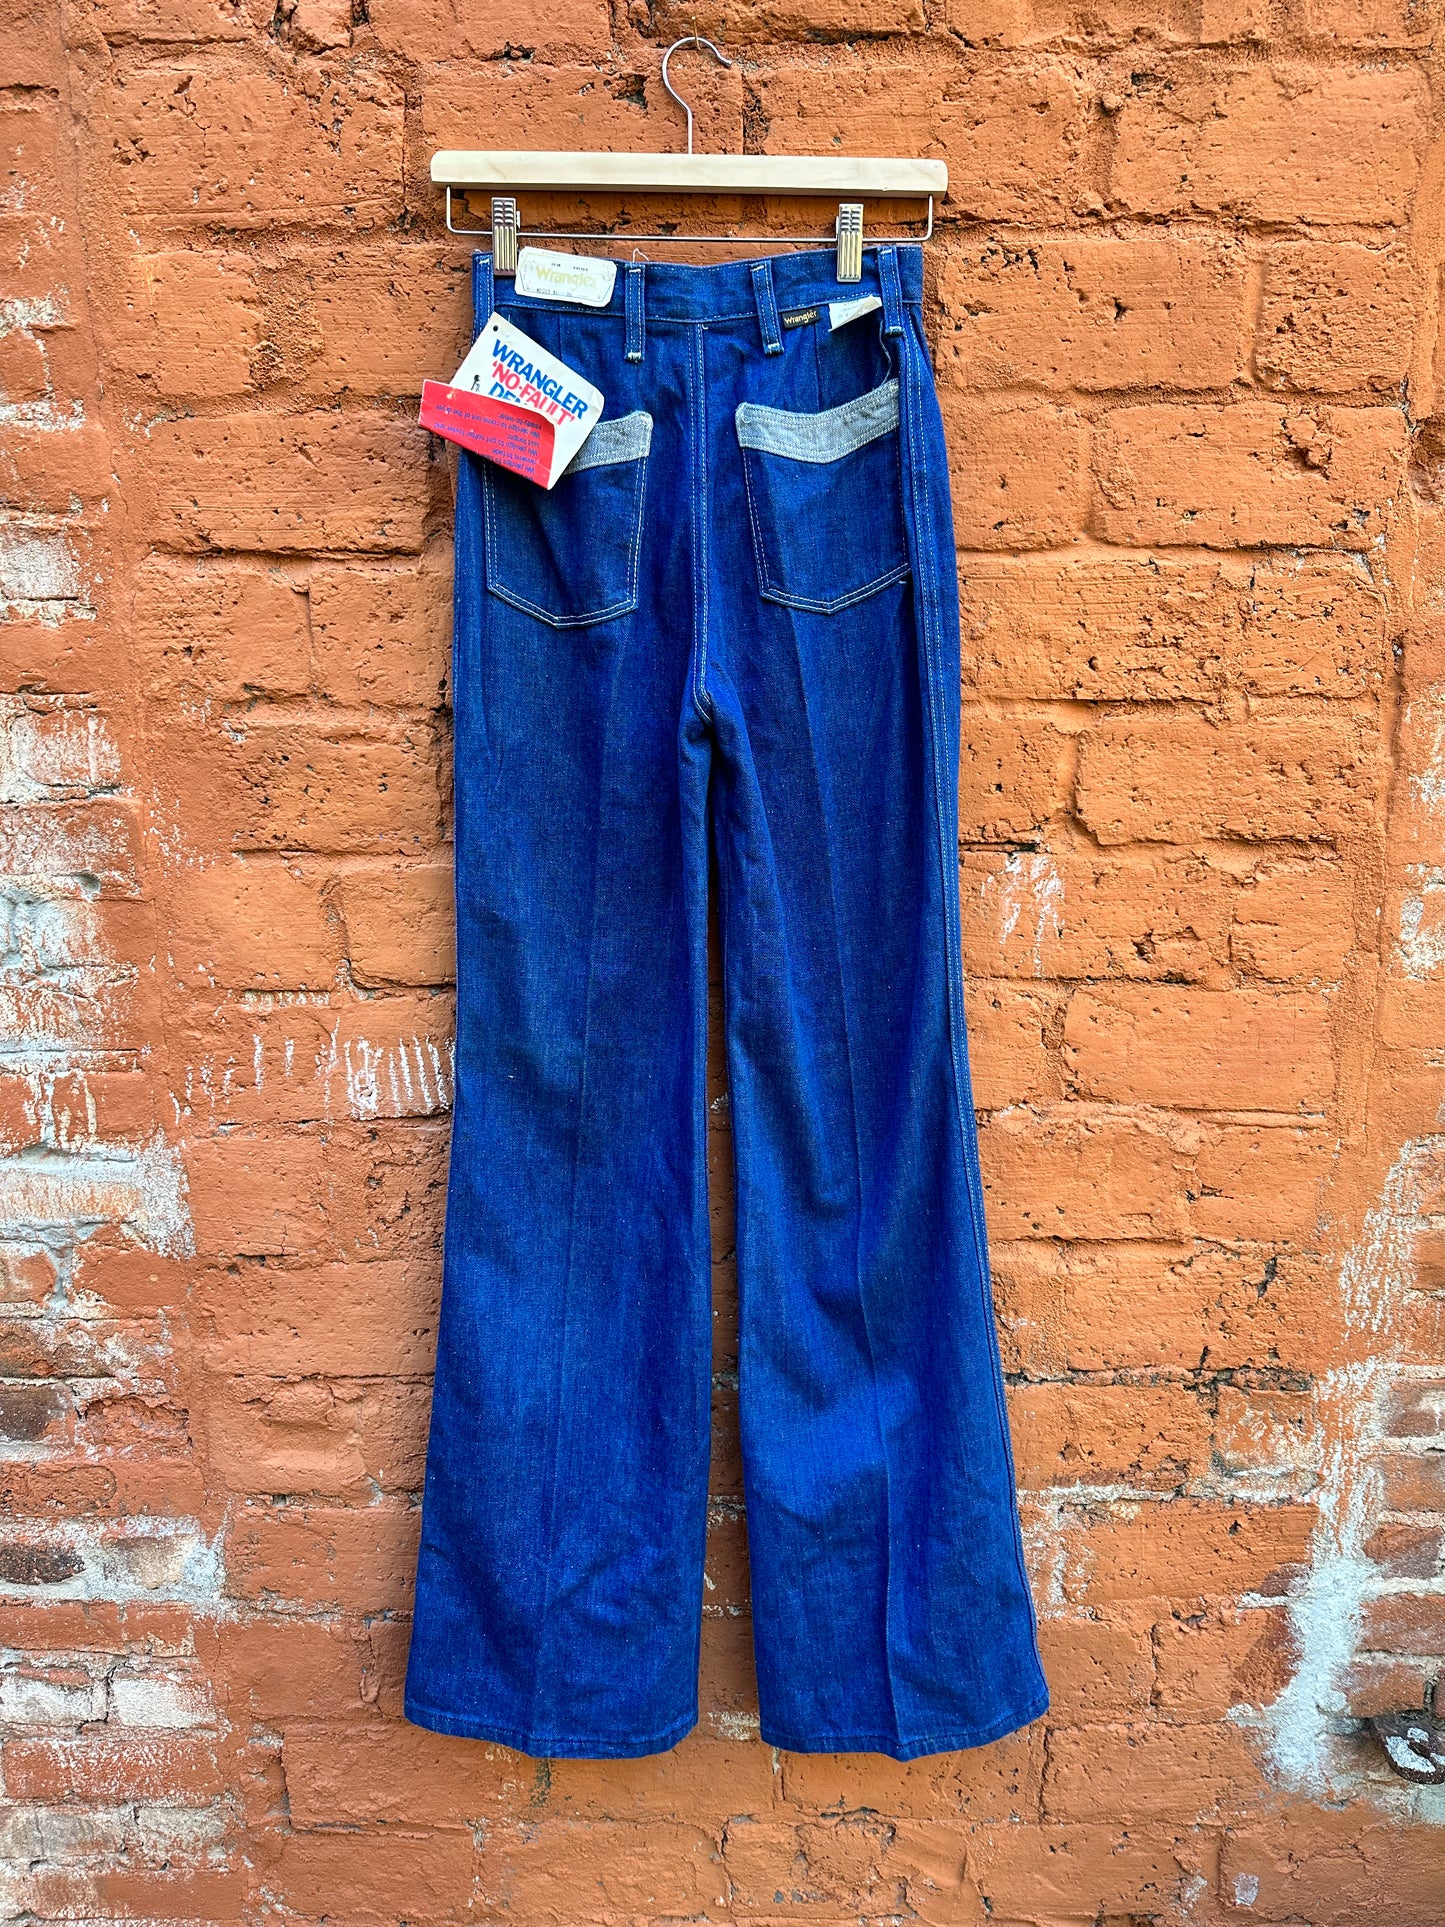 1970s Wrangler Bootcut Jeans Deadstock with tags